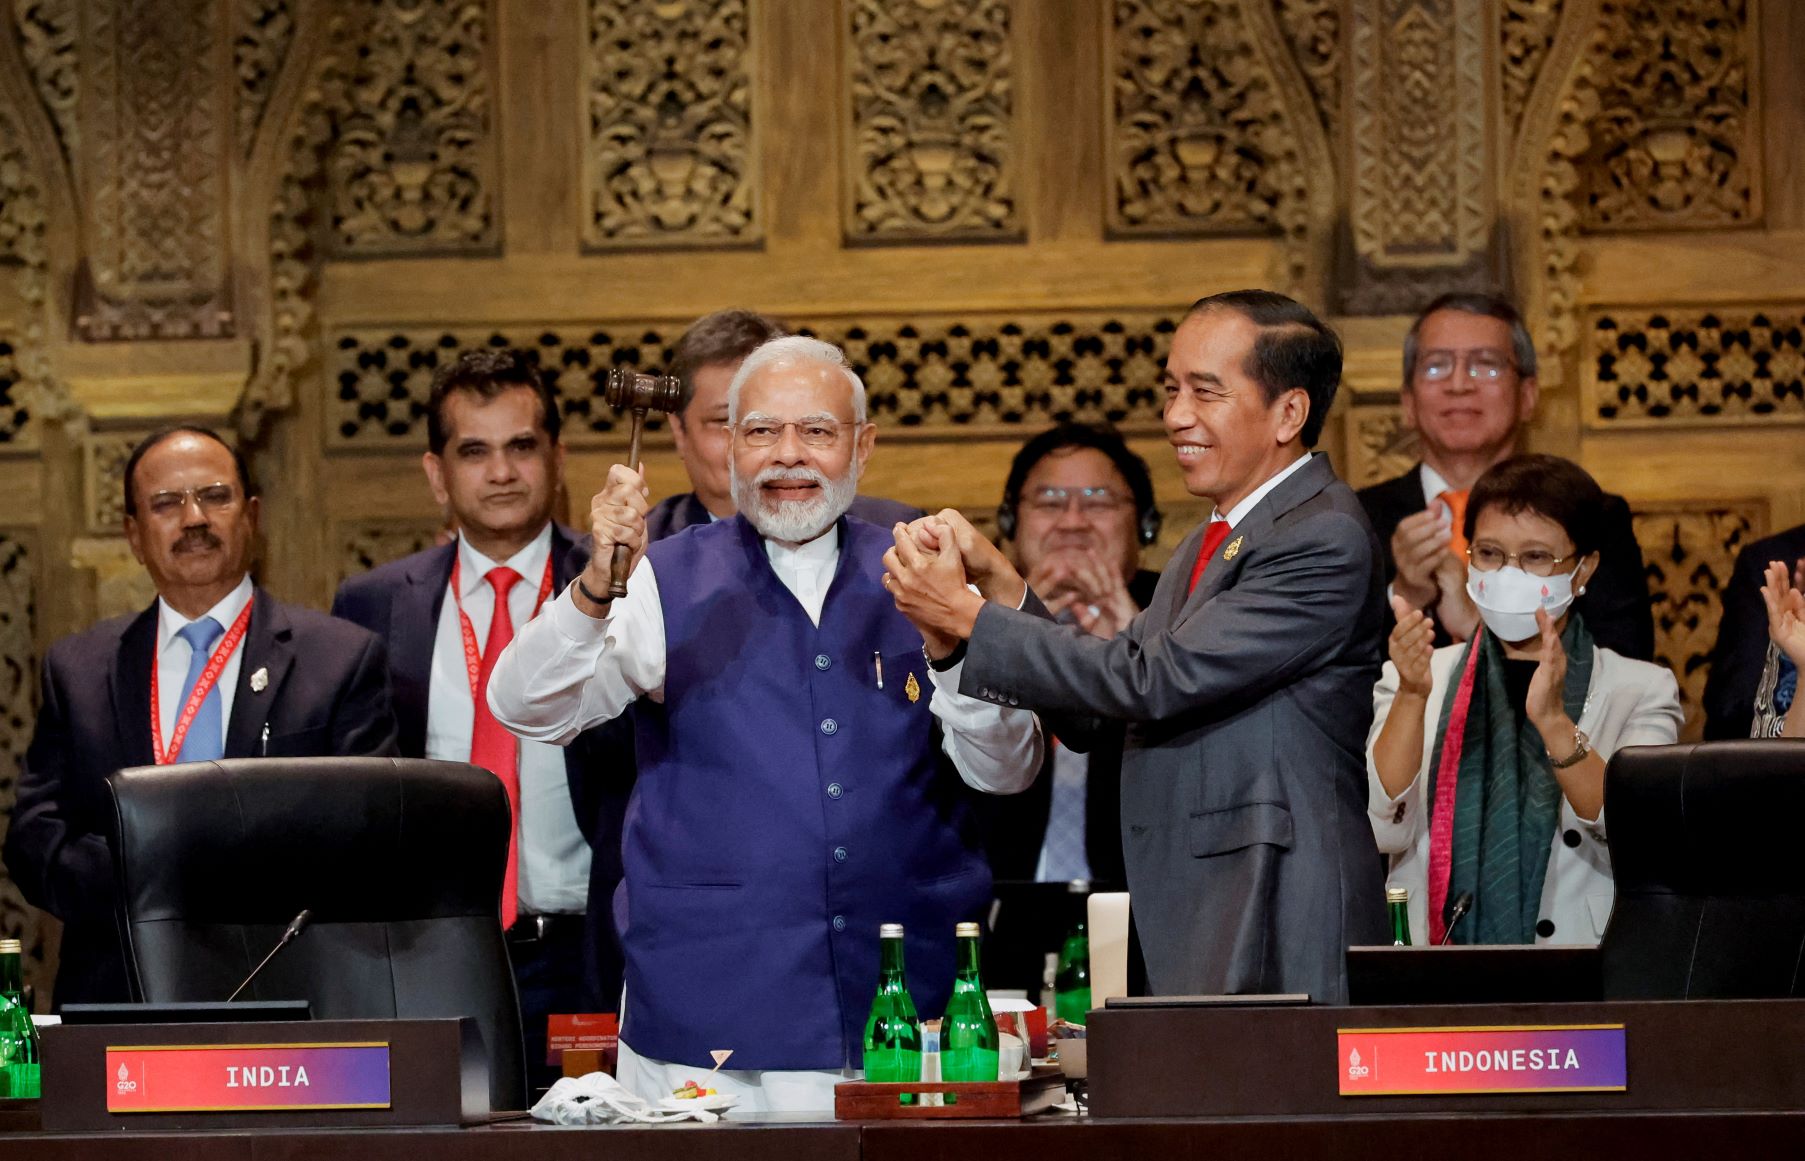 India's Prime Minister Narendra Modi, raising a gavel in one hand and Indonesia's President Joko Widodo’s hand in his other, stand and smile during the handover ceremony at the G20 Leaders' Summit in Bali, Indonesia on November 16, 2022. 